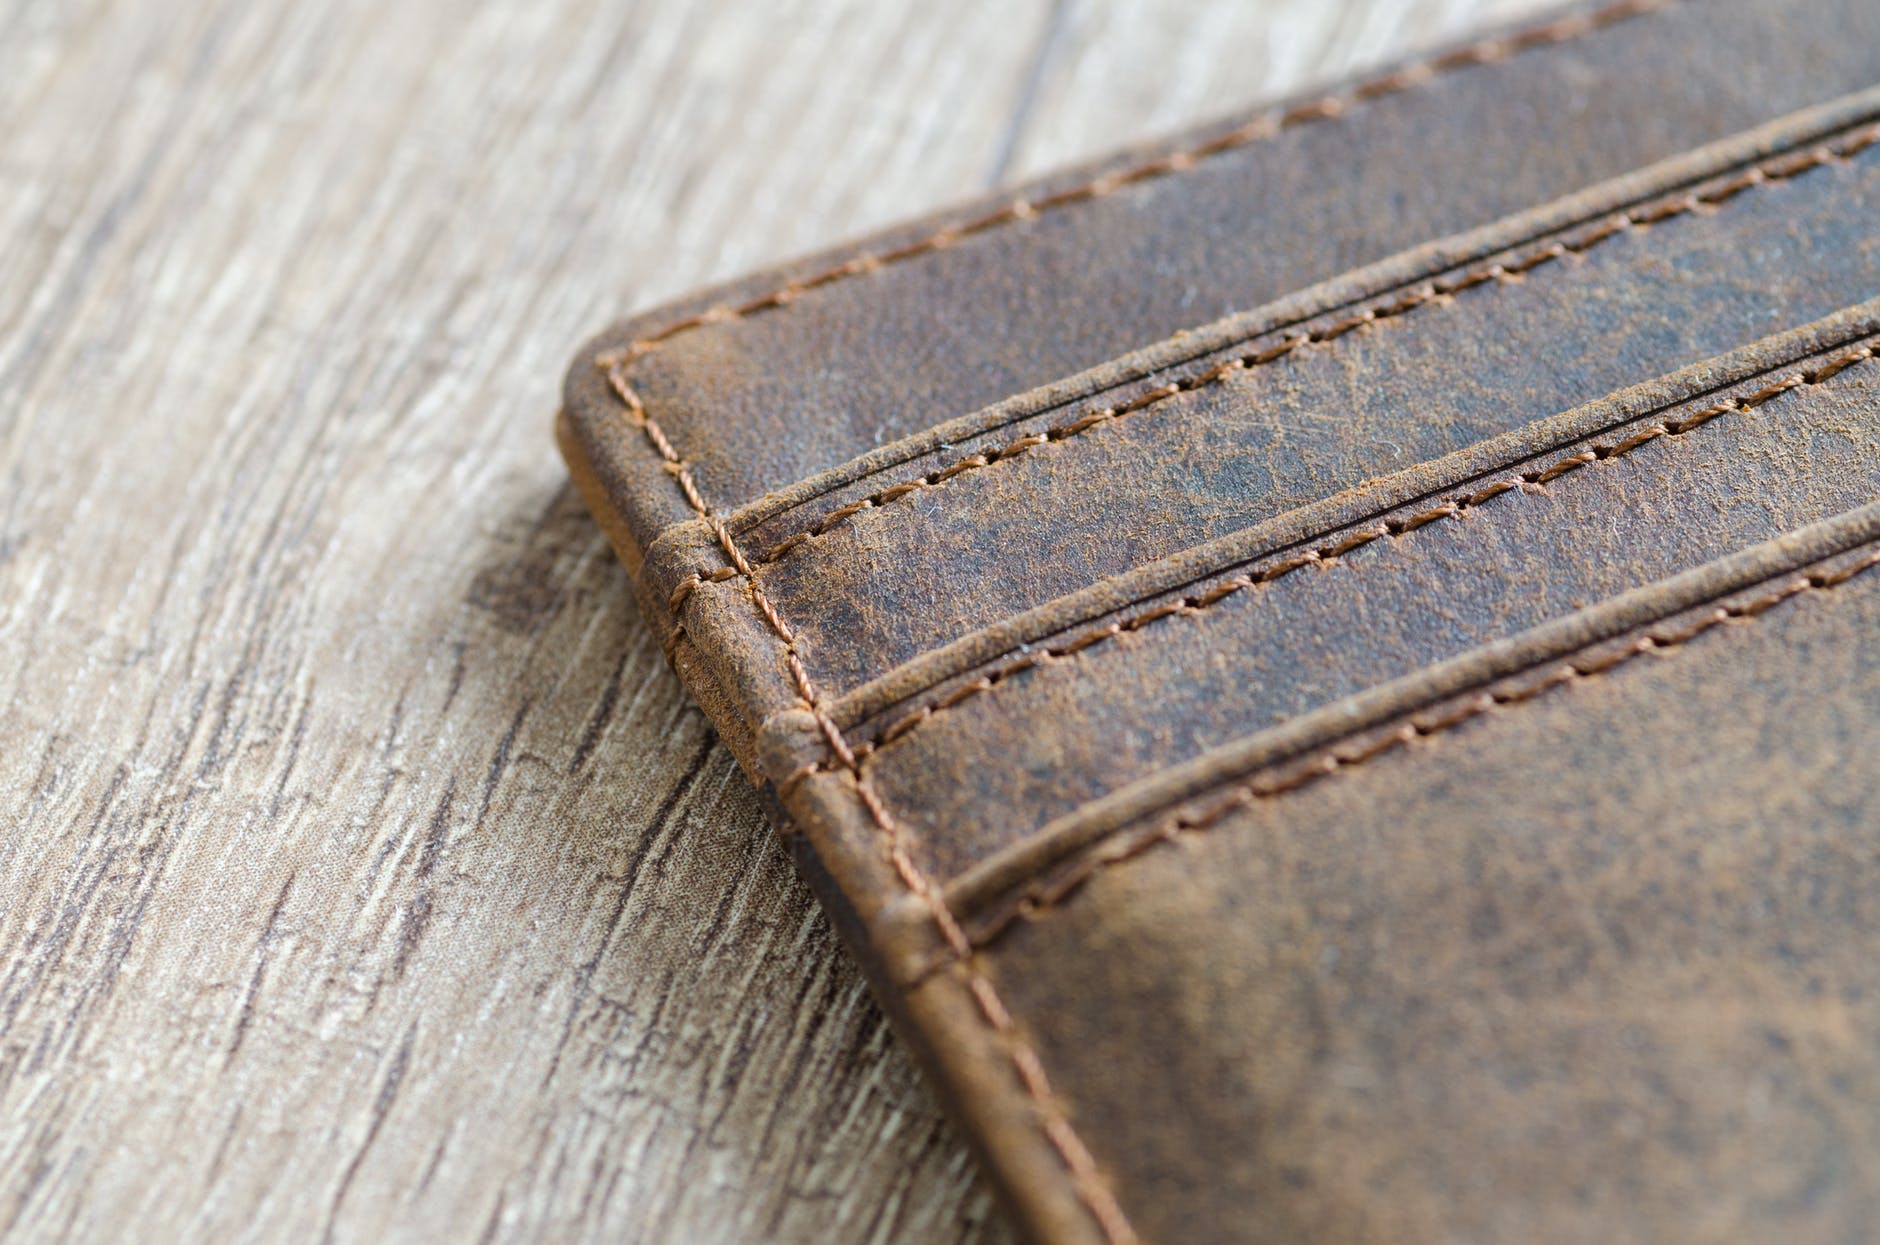 A Guide On How To Buy A Leather Wallet